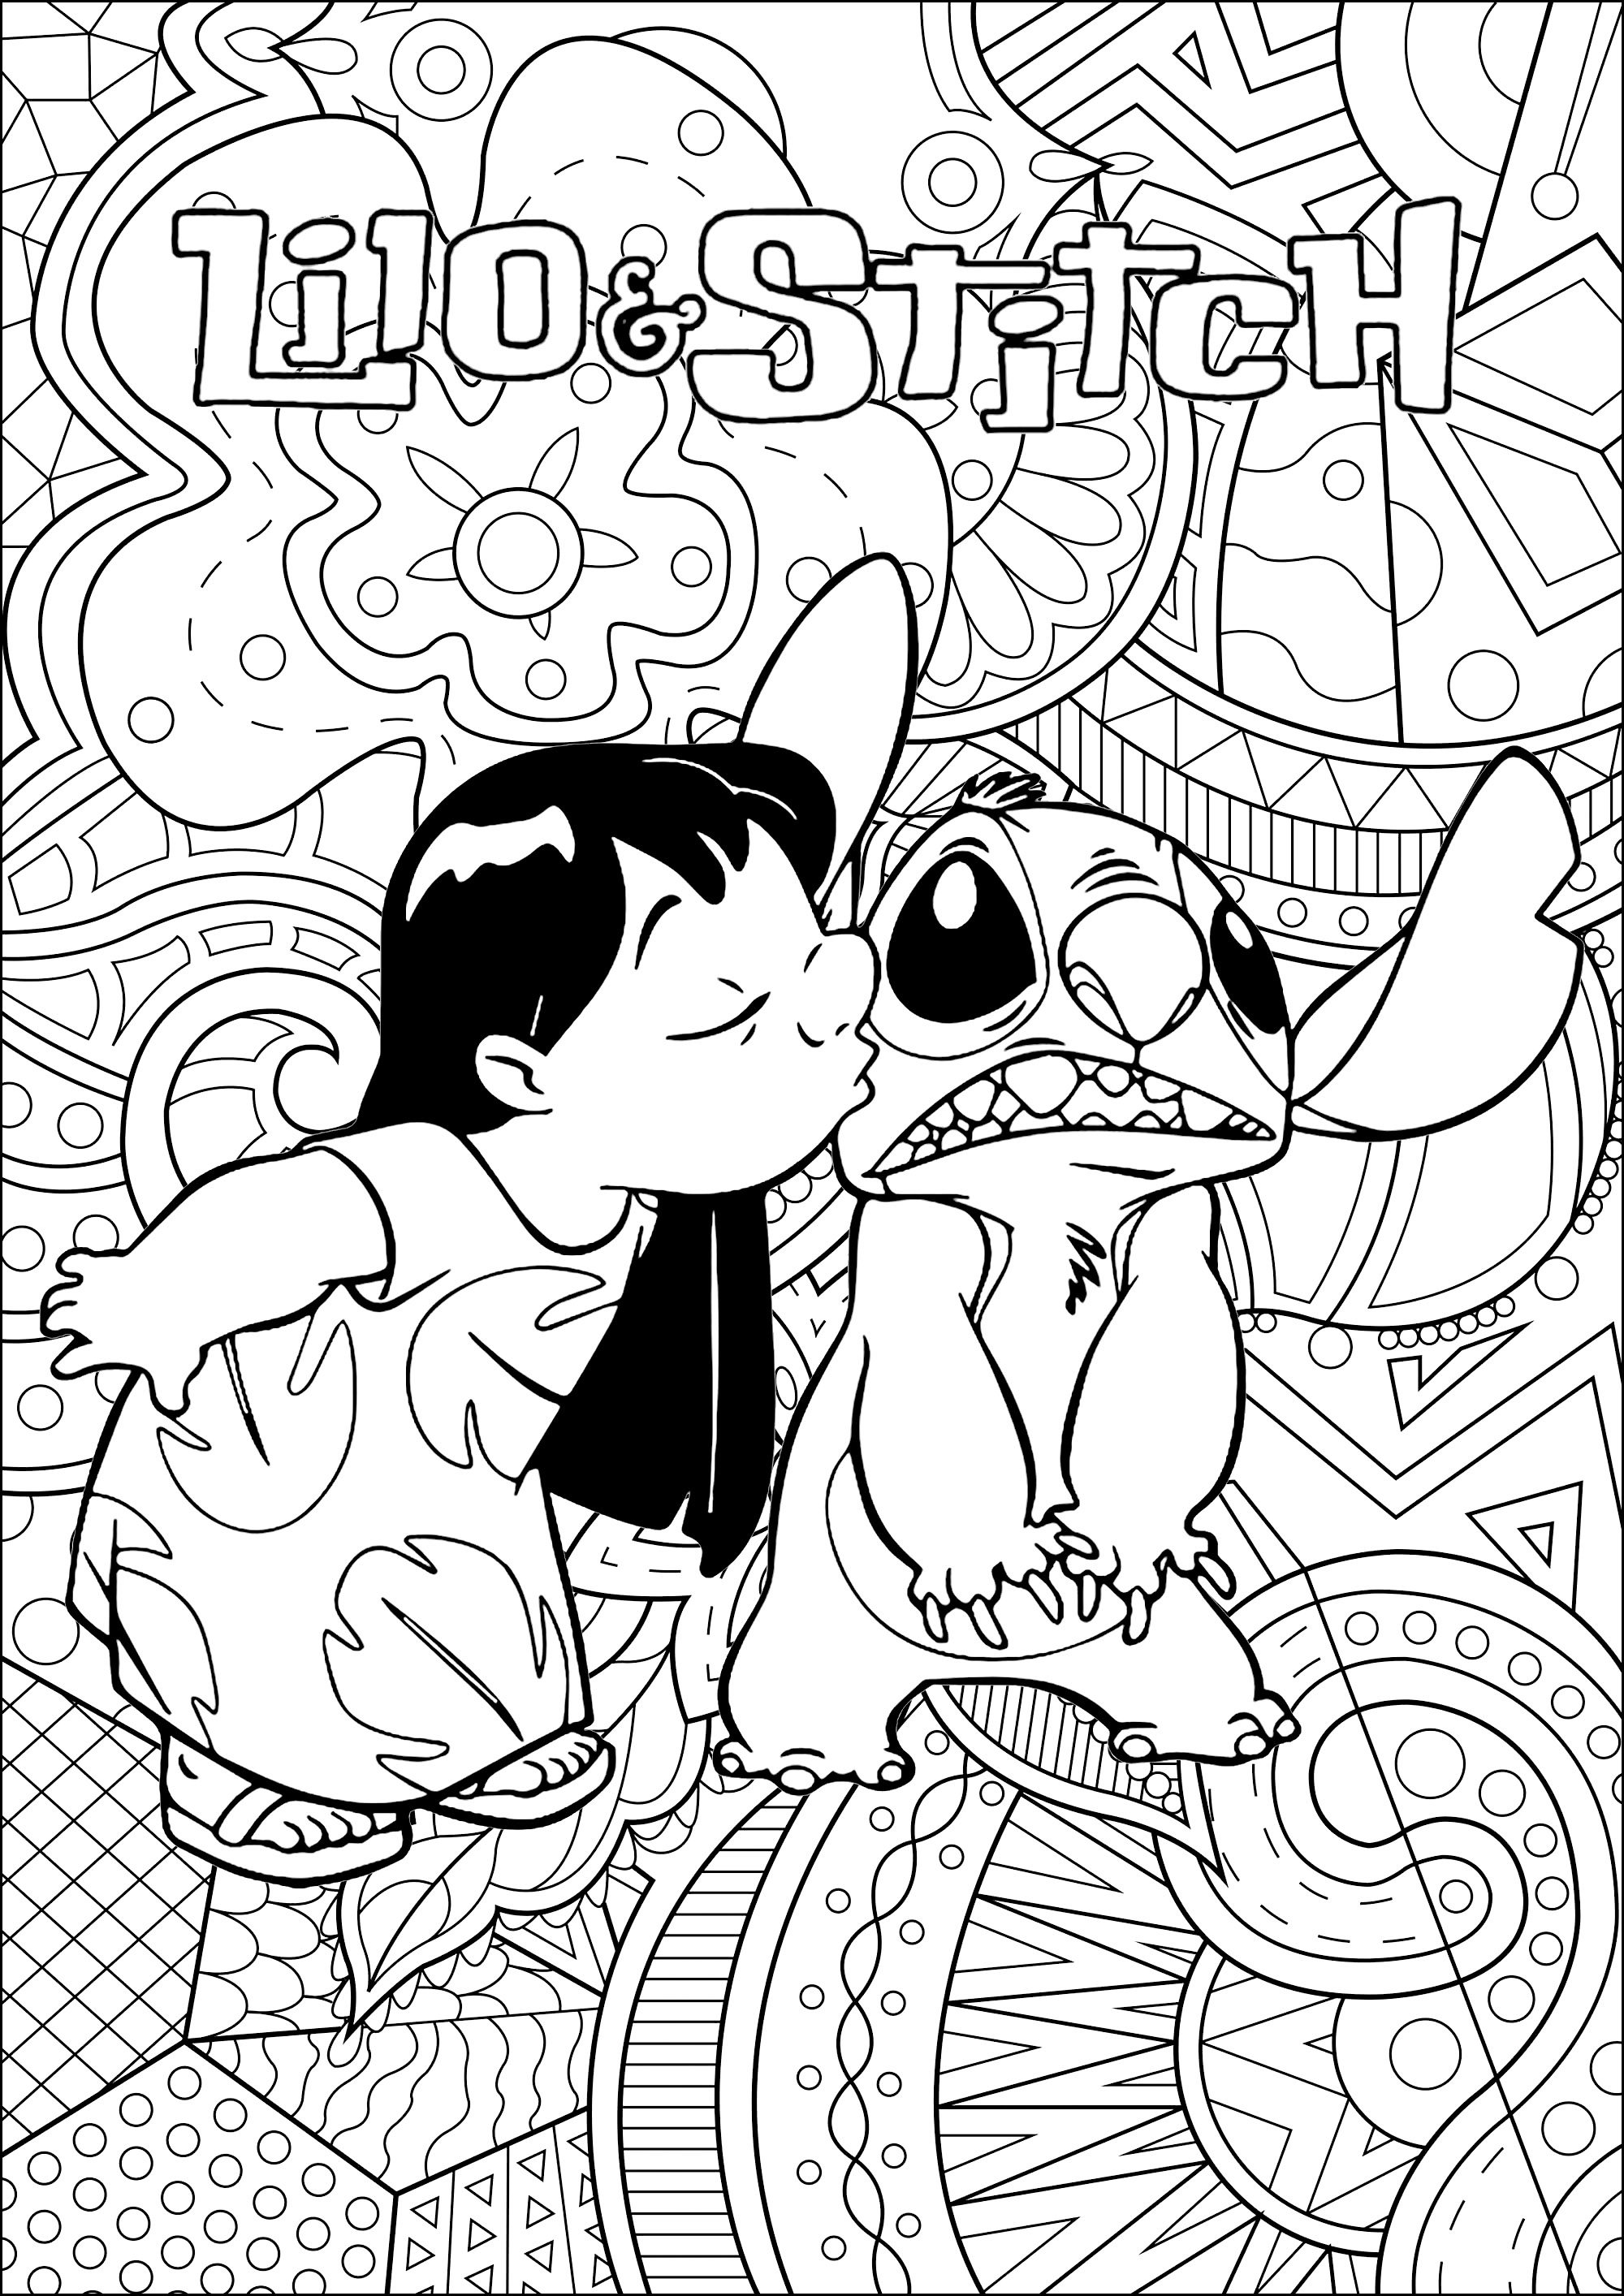 Lilo and Stitch (Disney) coloring page with intricate background. The story of Lilo and Stitch? Stitch washes up on Earth, in the middle of the Pacific, on the island of Hawaii. The little alien is soon taken in by Lilo, an adorable six-year-old girl who mistakes him for an abandoned dog ...